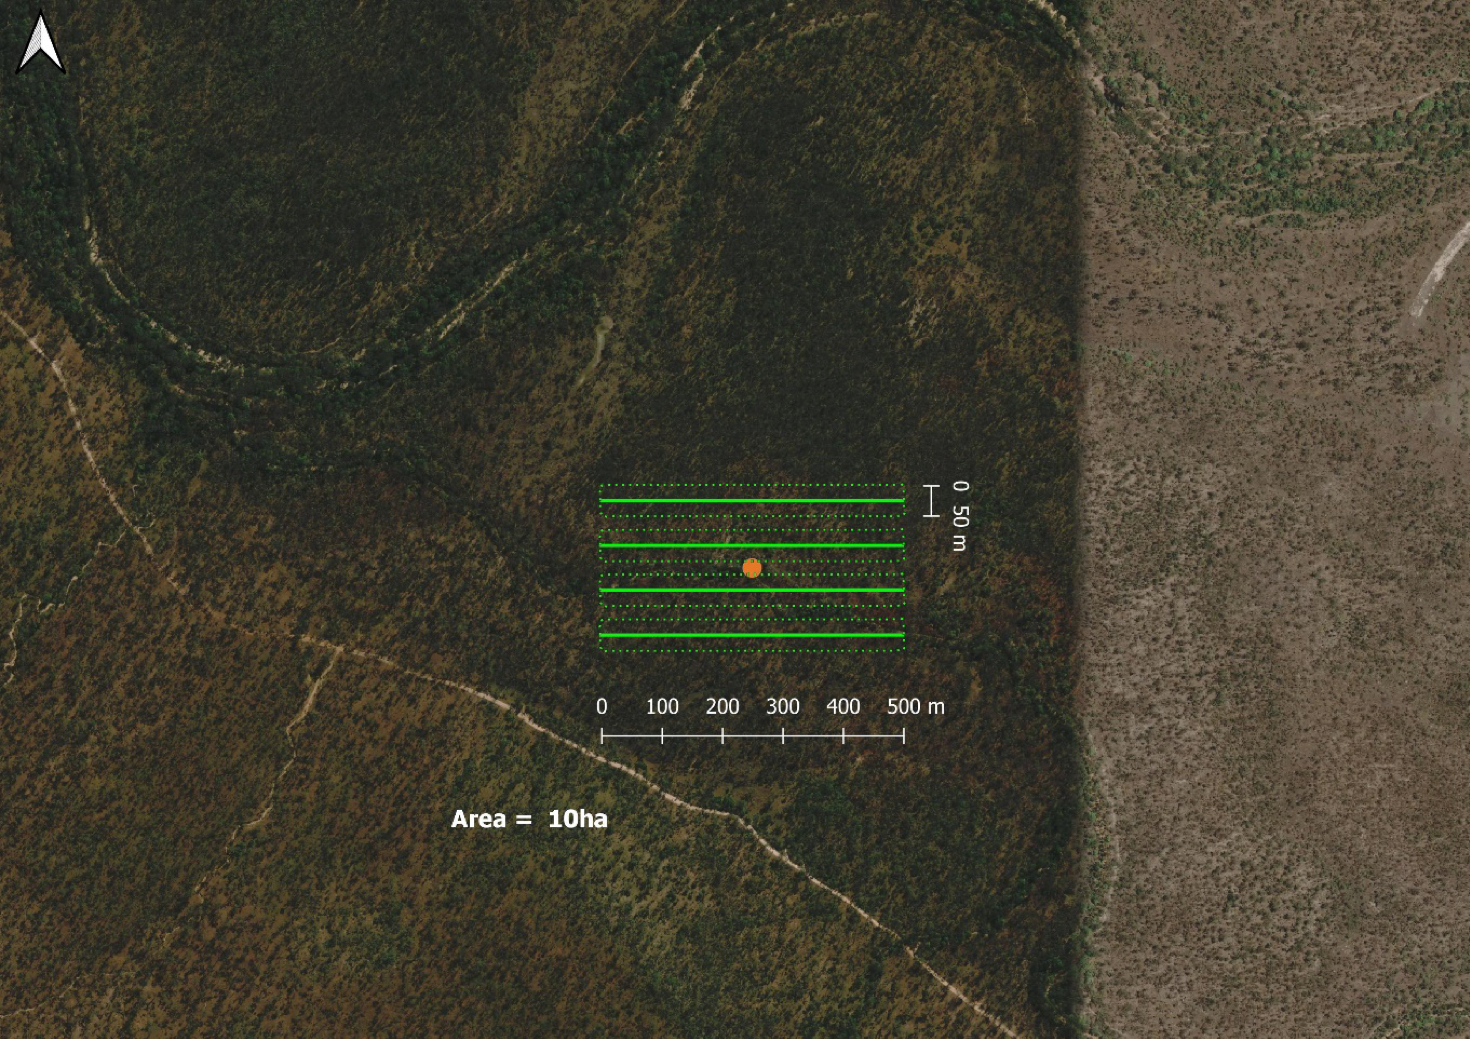 An aerial image with four parallel transect lines drawn across it